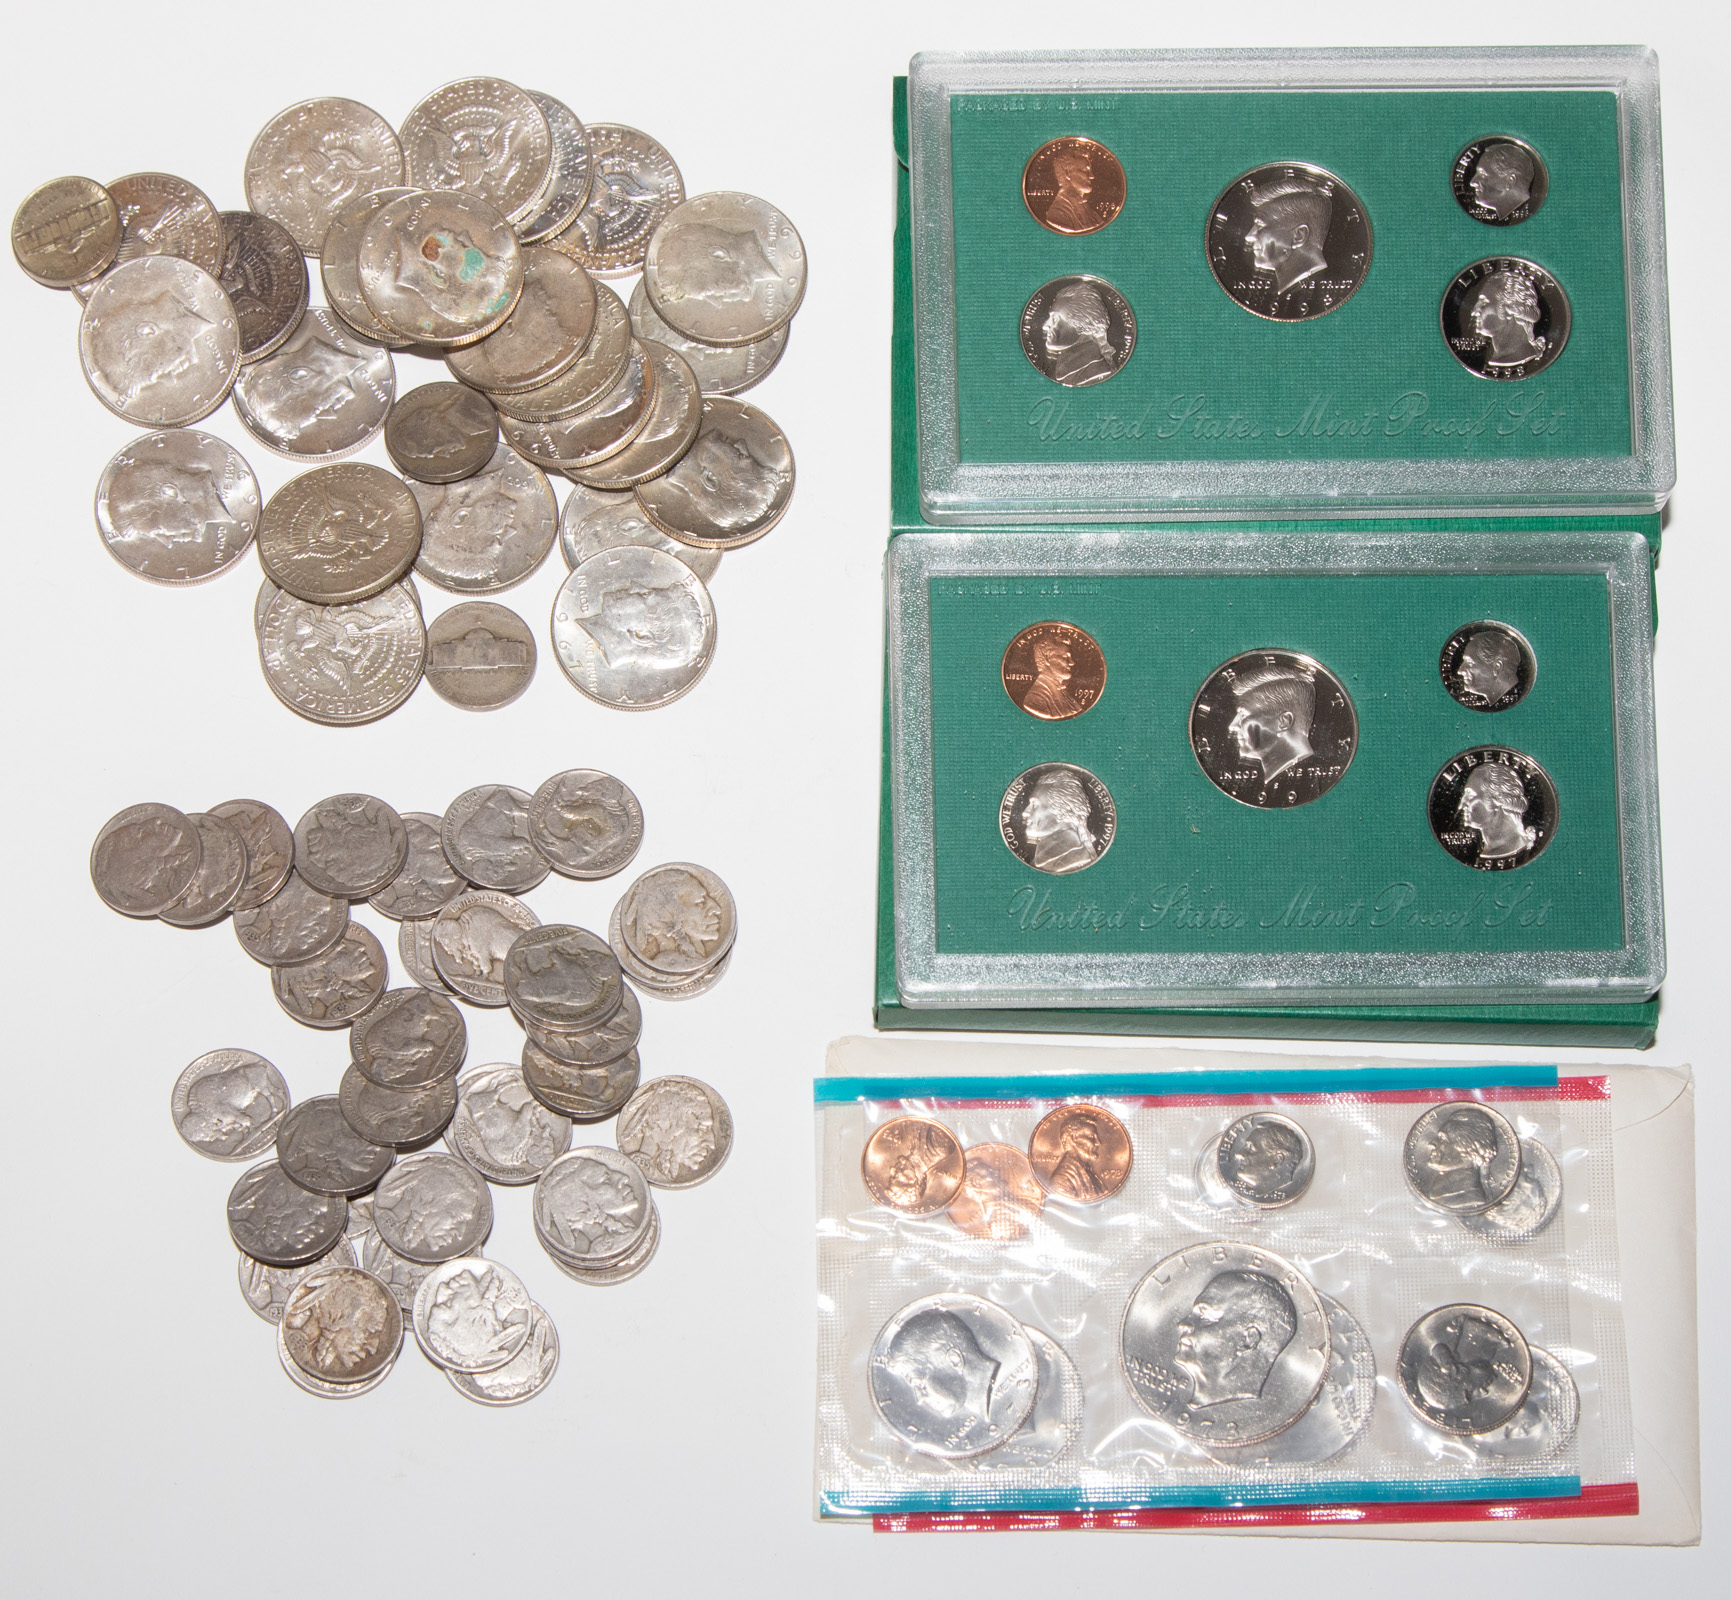 NICE LITTLE COIN COLLECTION 5 silver 334dc7